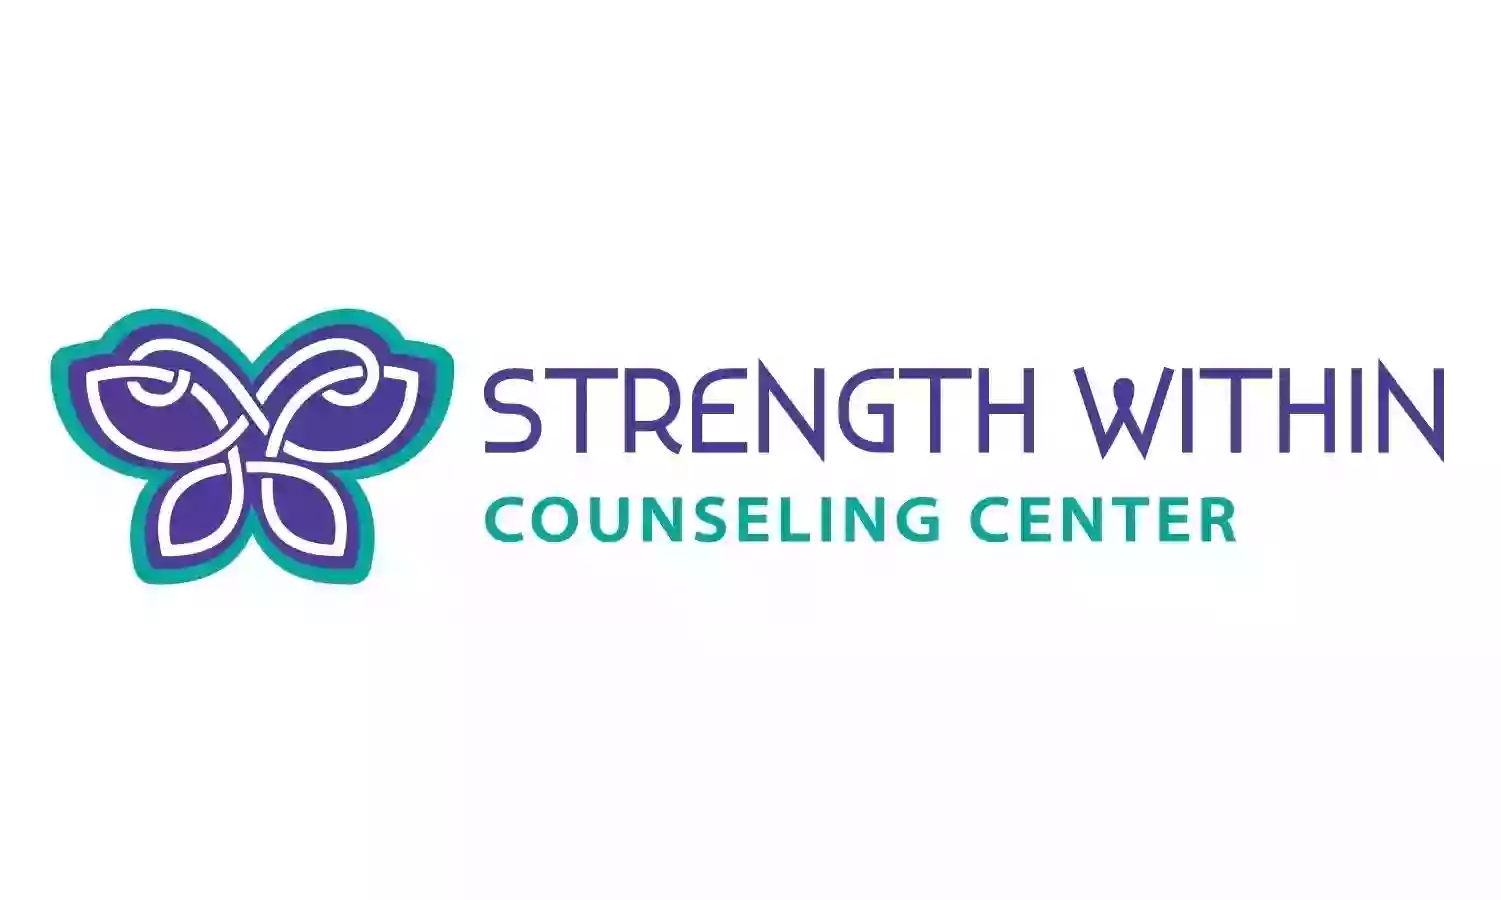 Strength Within Counseling Center